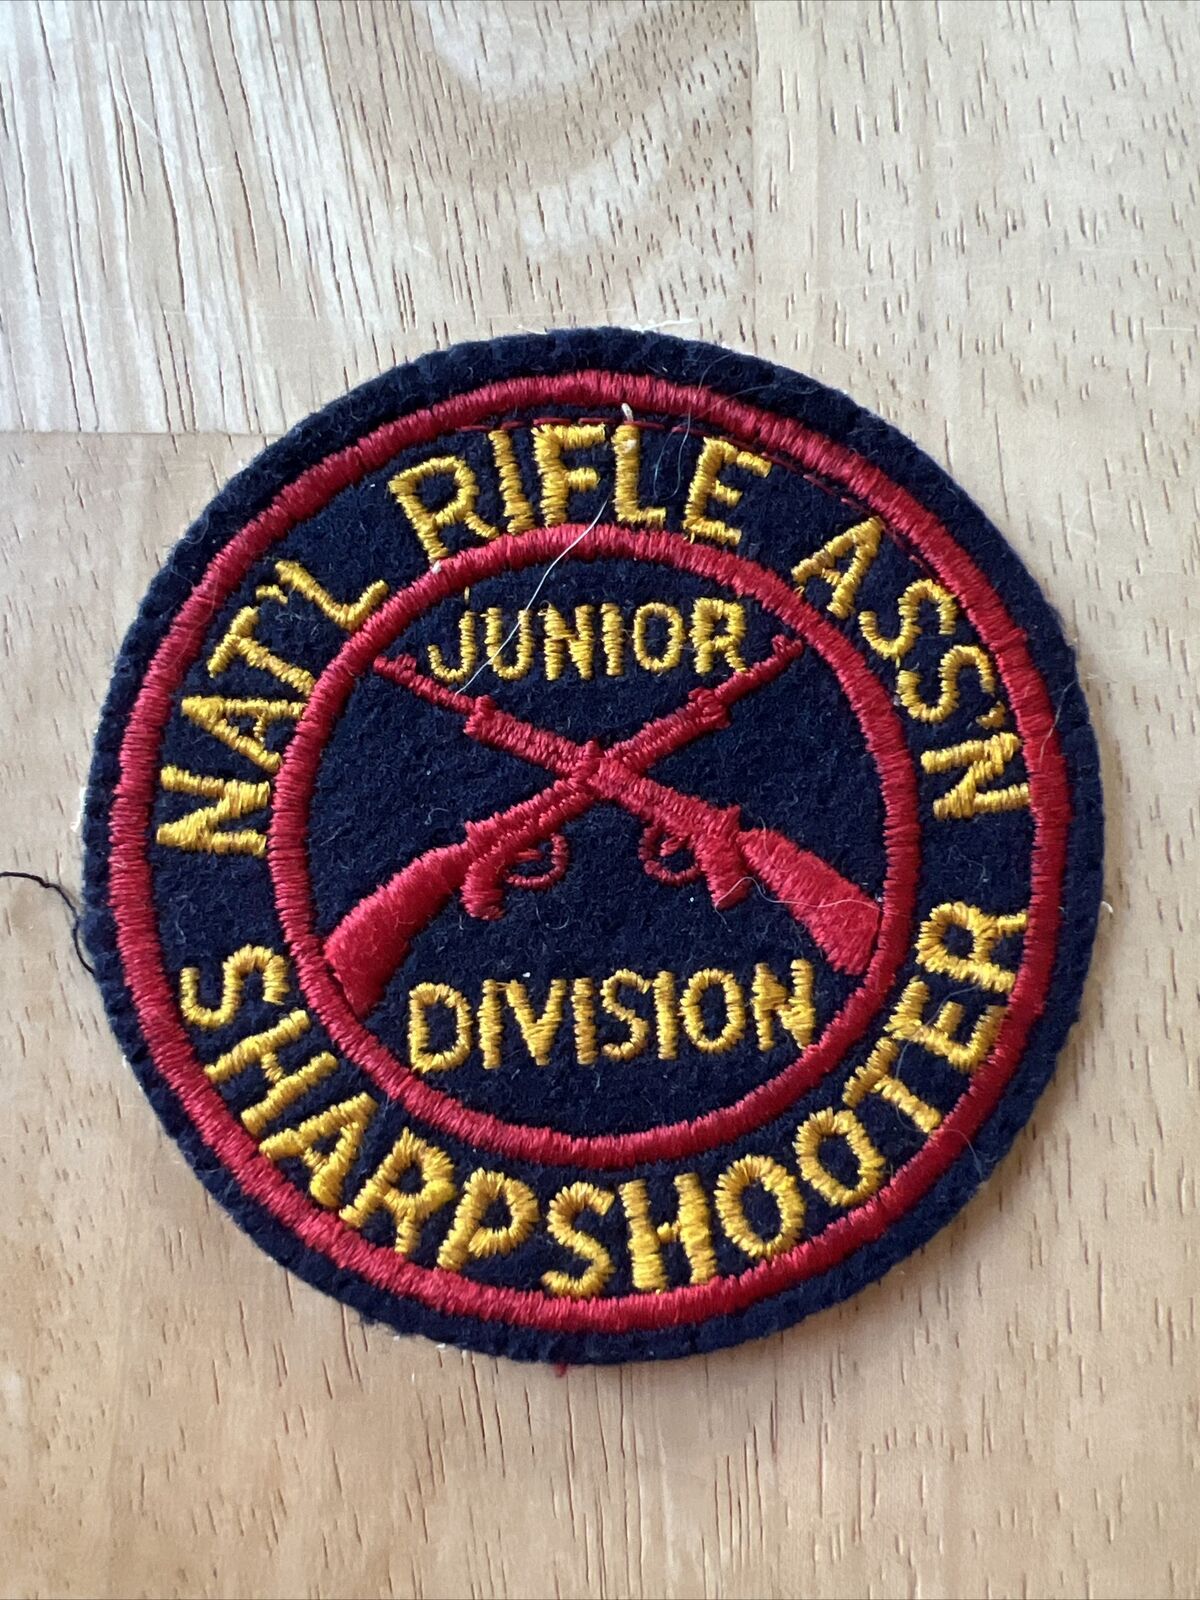 Vintage National Rifle Assn. Sharpshooter Junior Division patch